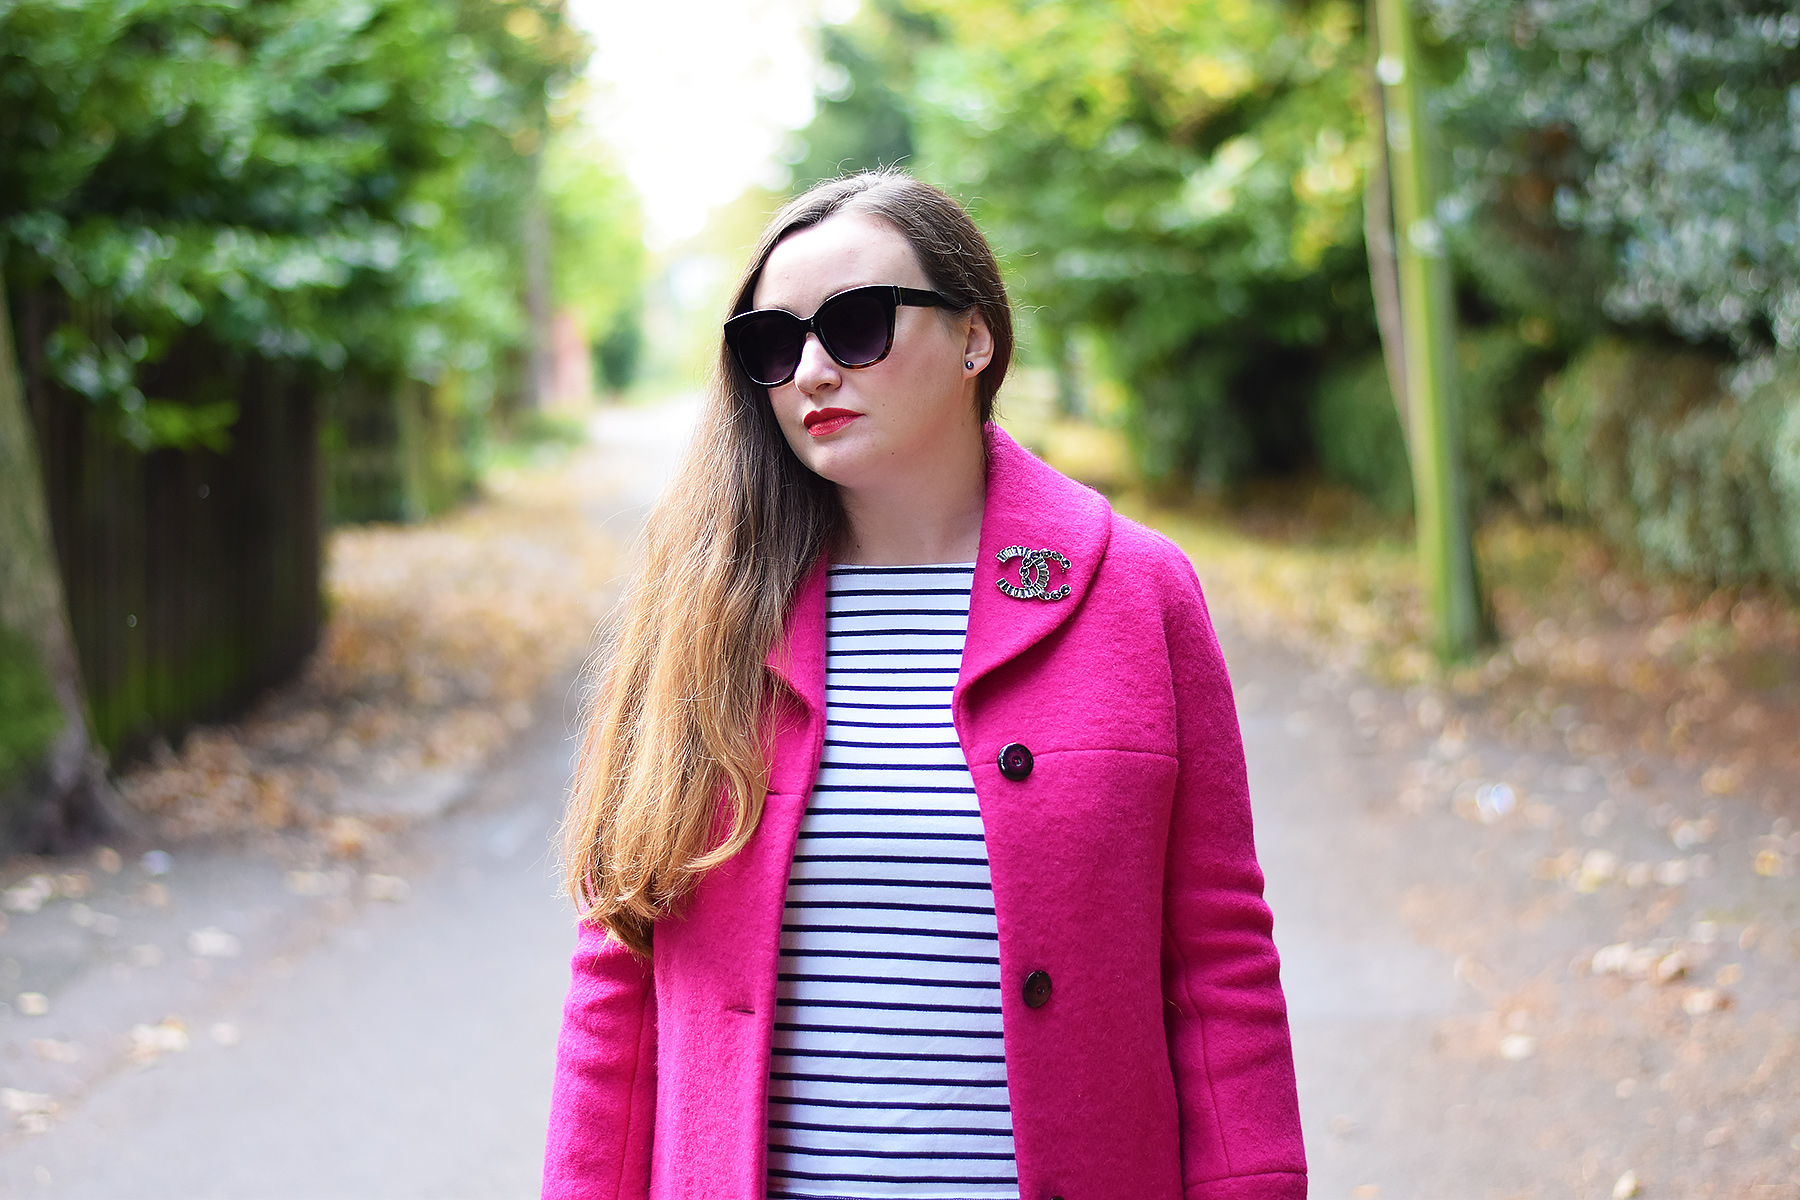 Wearing a chanel cc Brooch on a pink coat with striped top